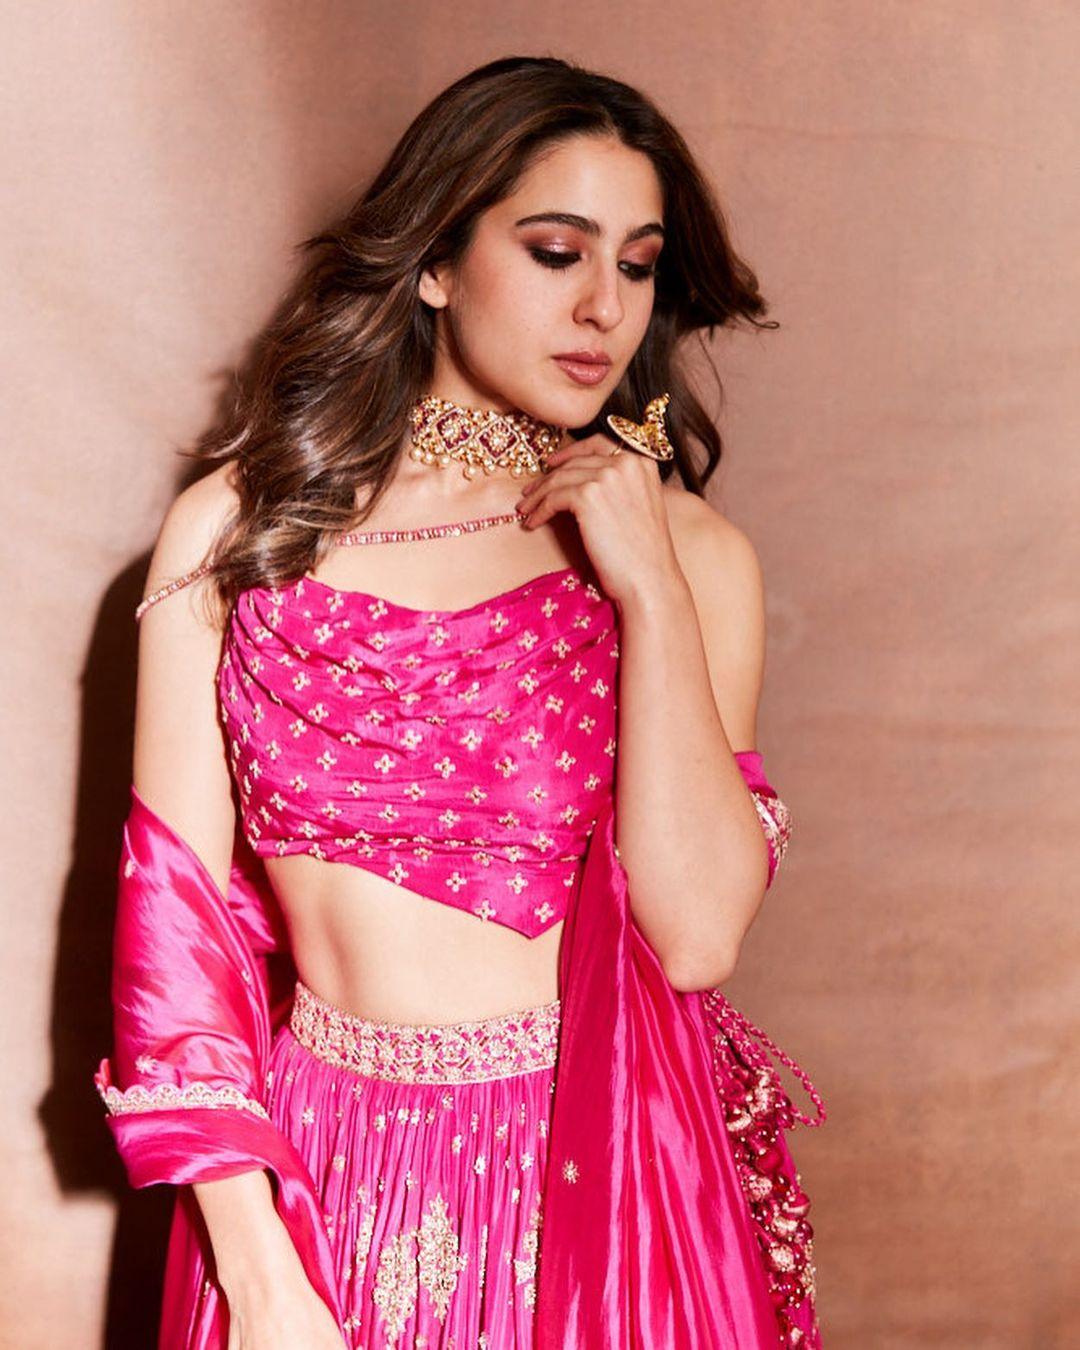 Her outfit includes a stunning pink slip blouse with an asymmetrical hem that beautifully showcases her toned abs. She perfectly pairs it with a gold and pink embroidered lehenga, and a silk rani pink dupatta adds the finishing touch to her show-stopping ethnic look.